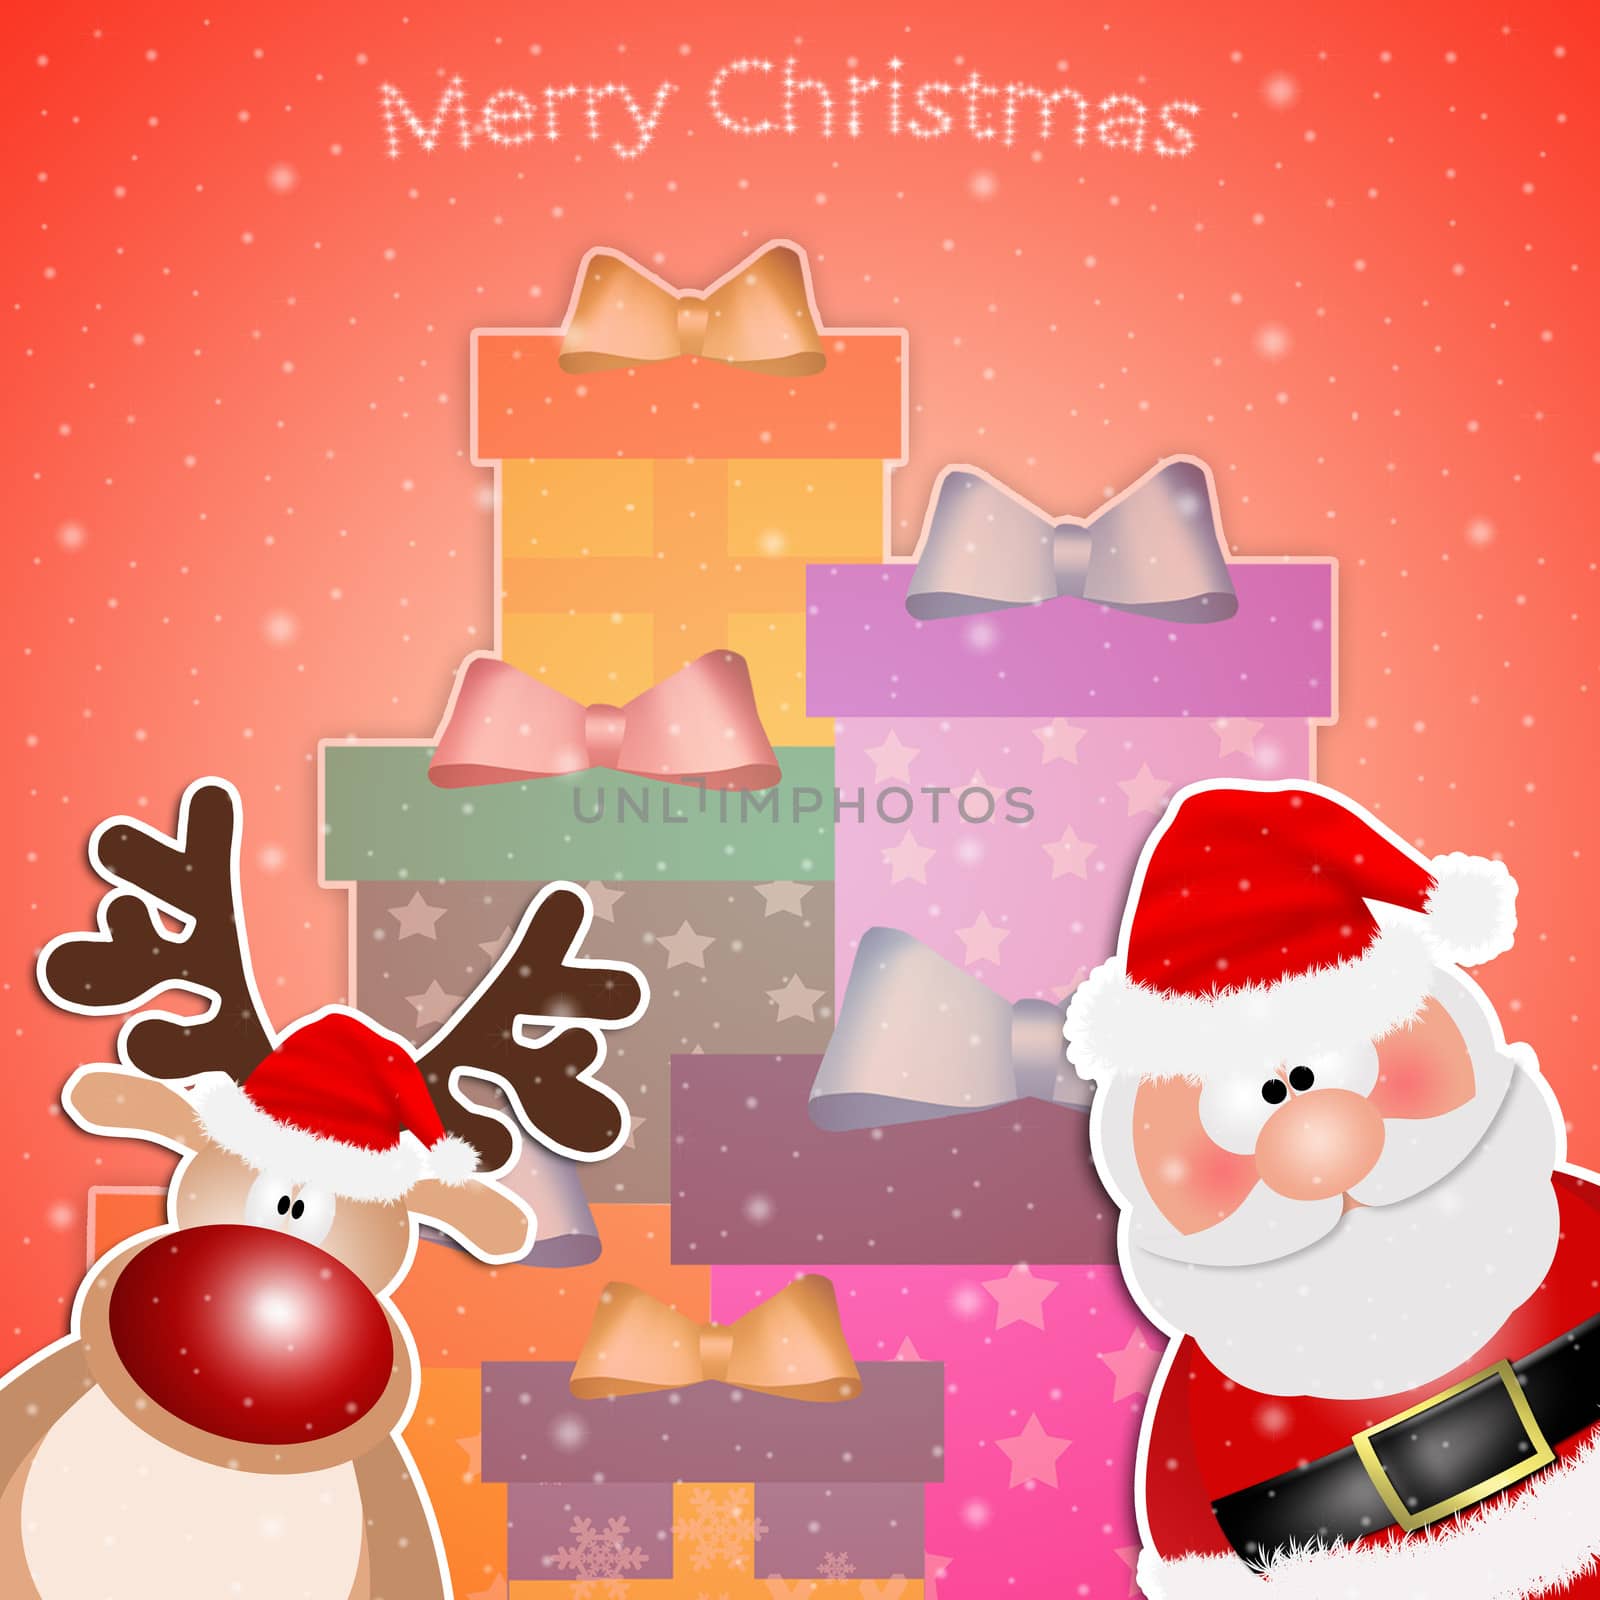 Santa Claus with gifts for Christmas